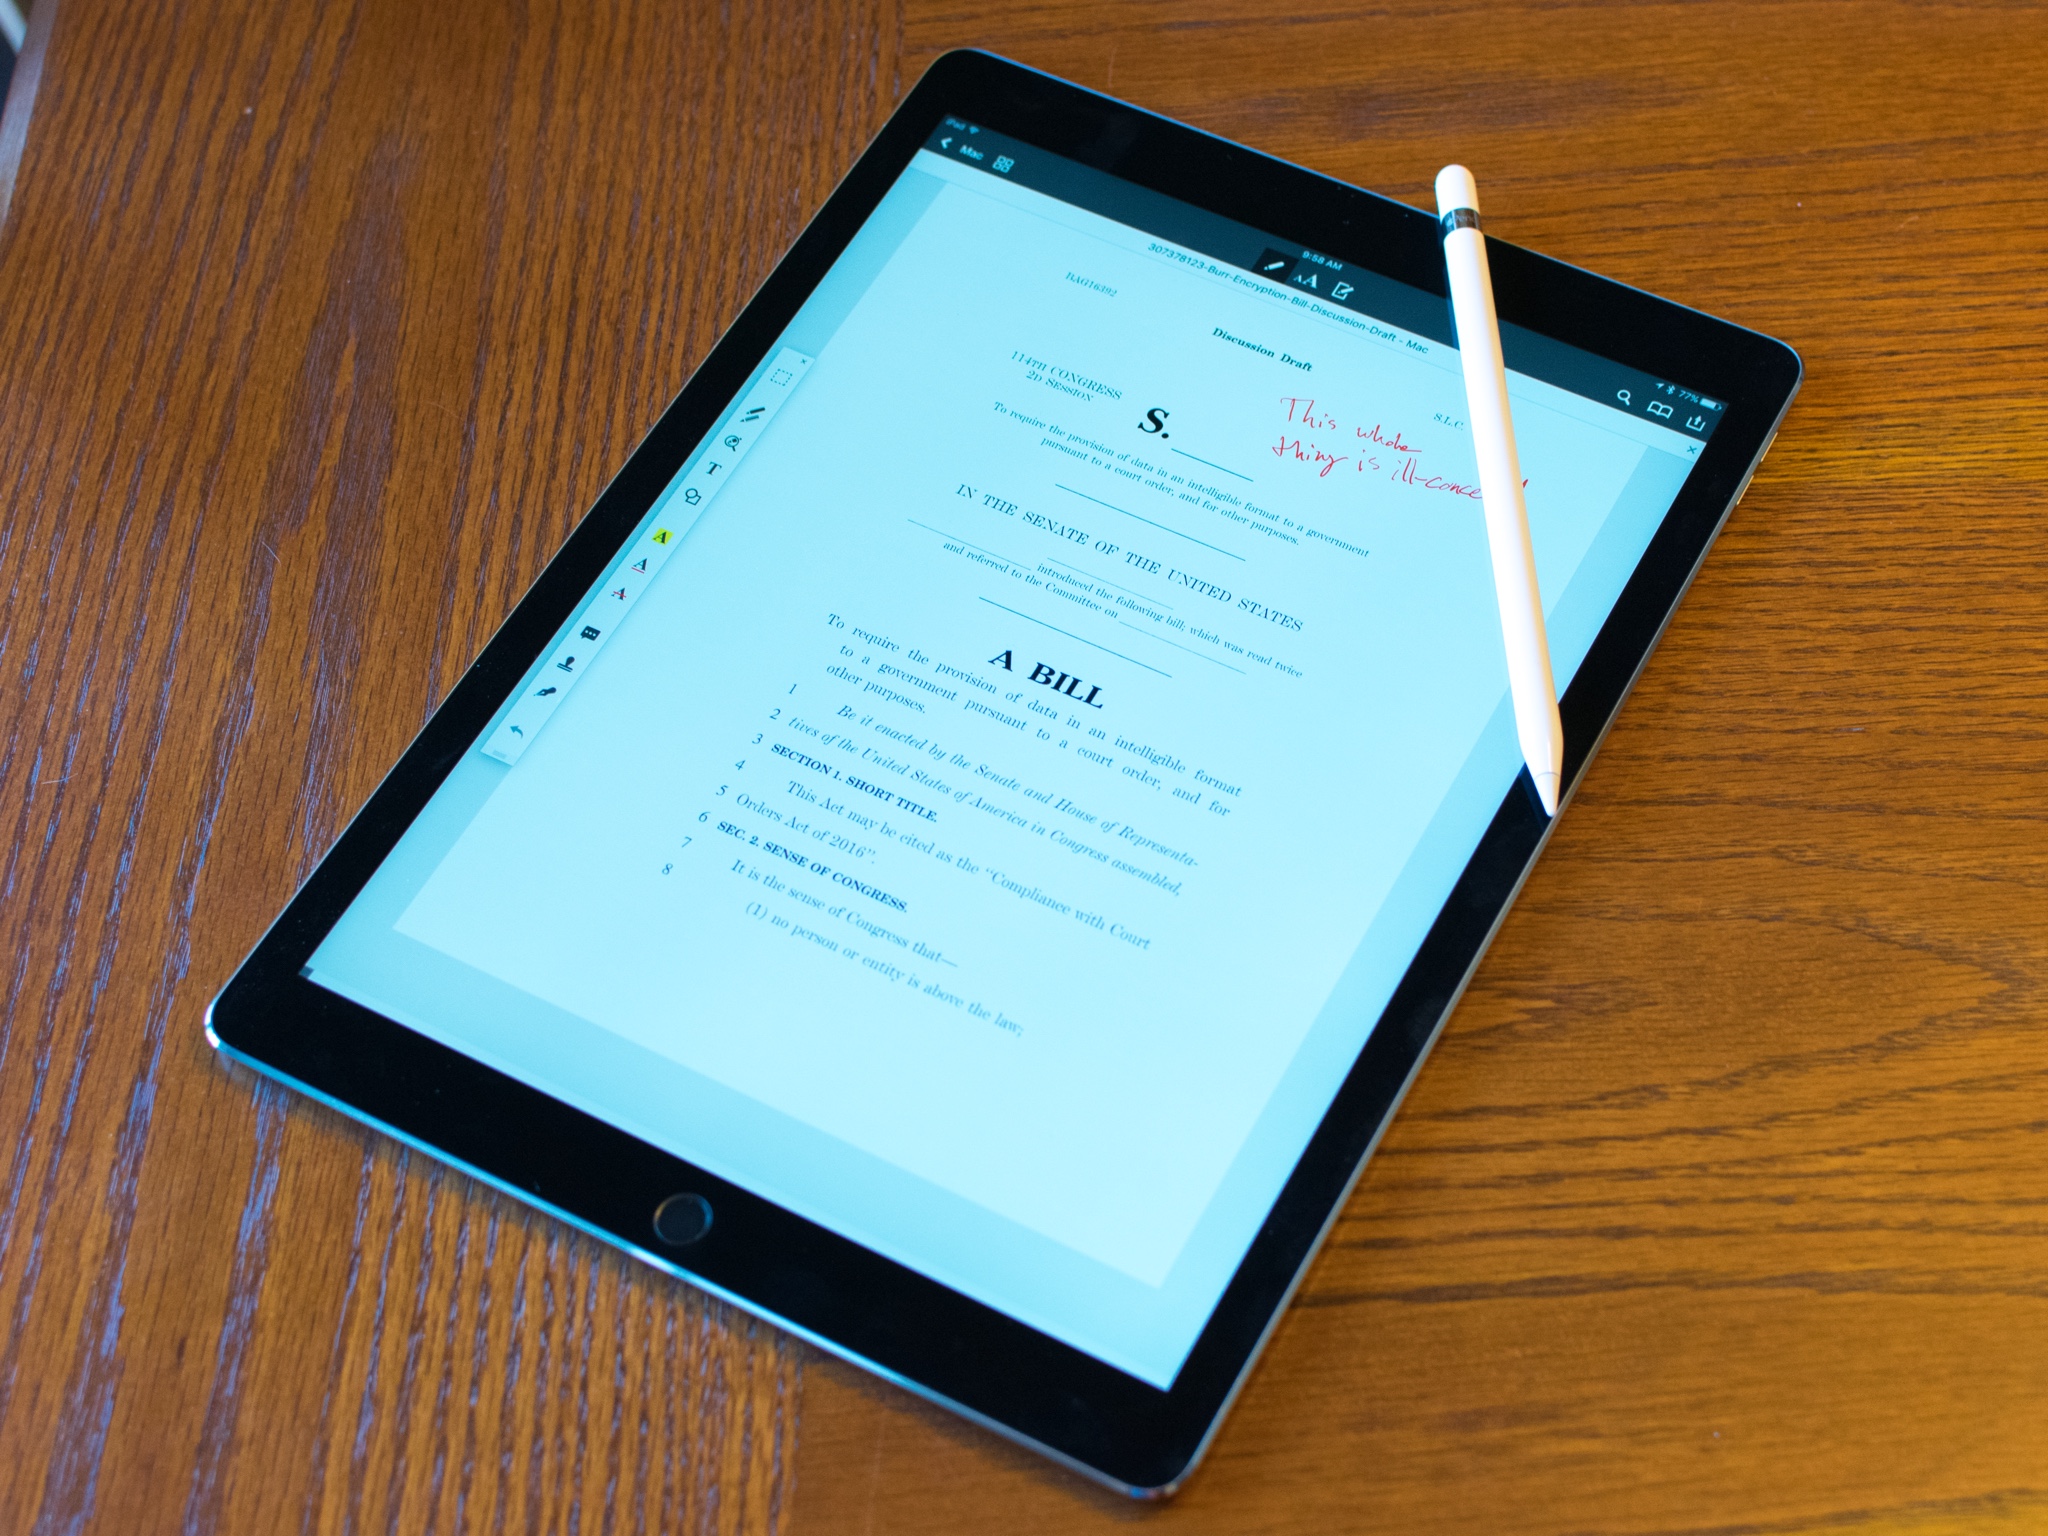 PDF Expert picks up Apple Pencil support, quick document transfer